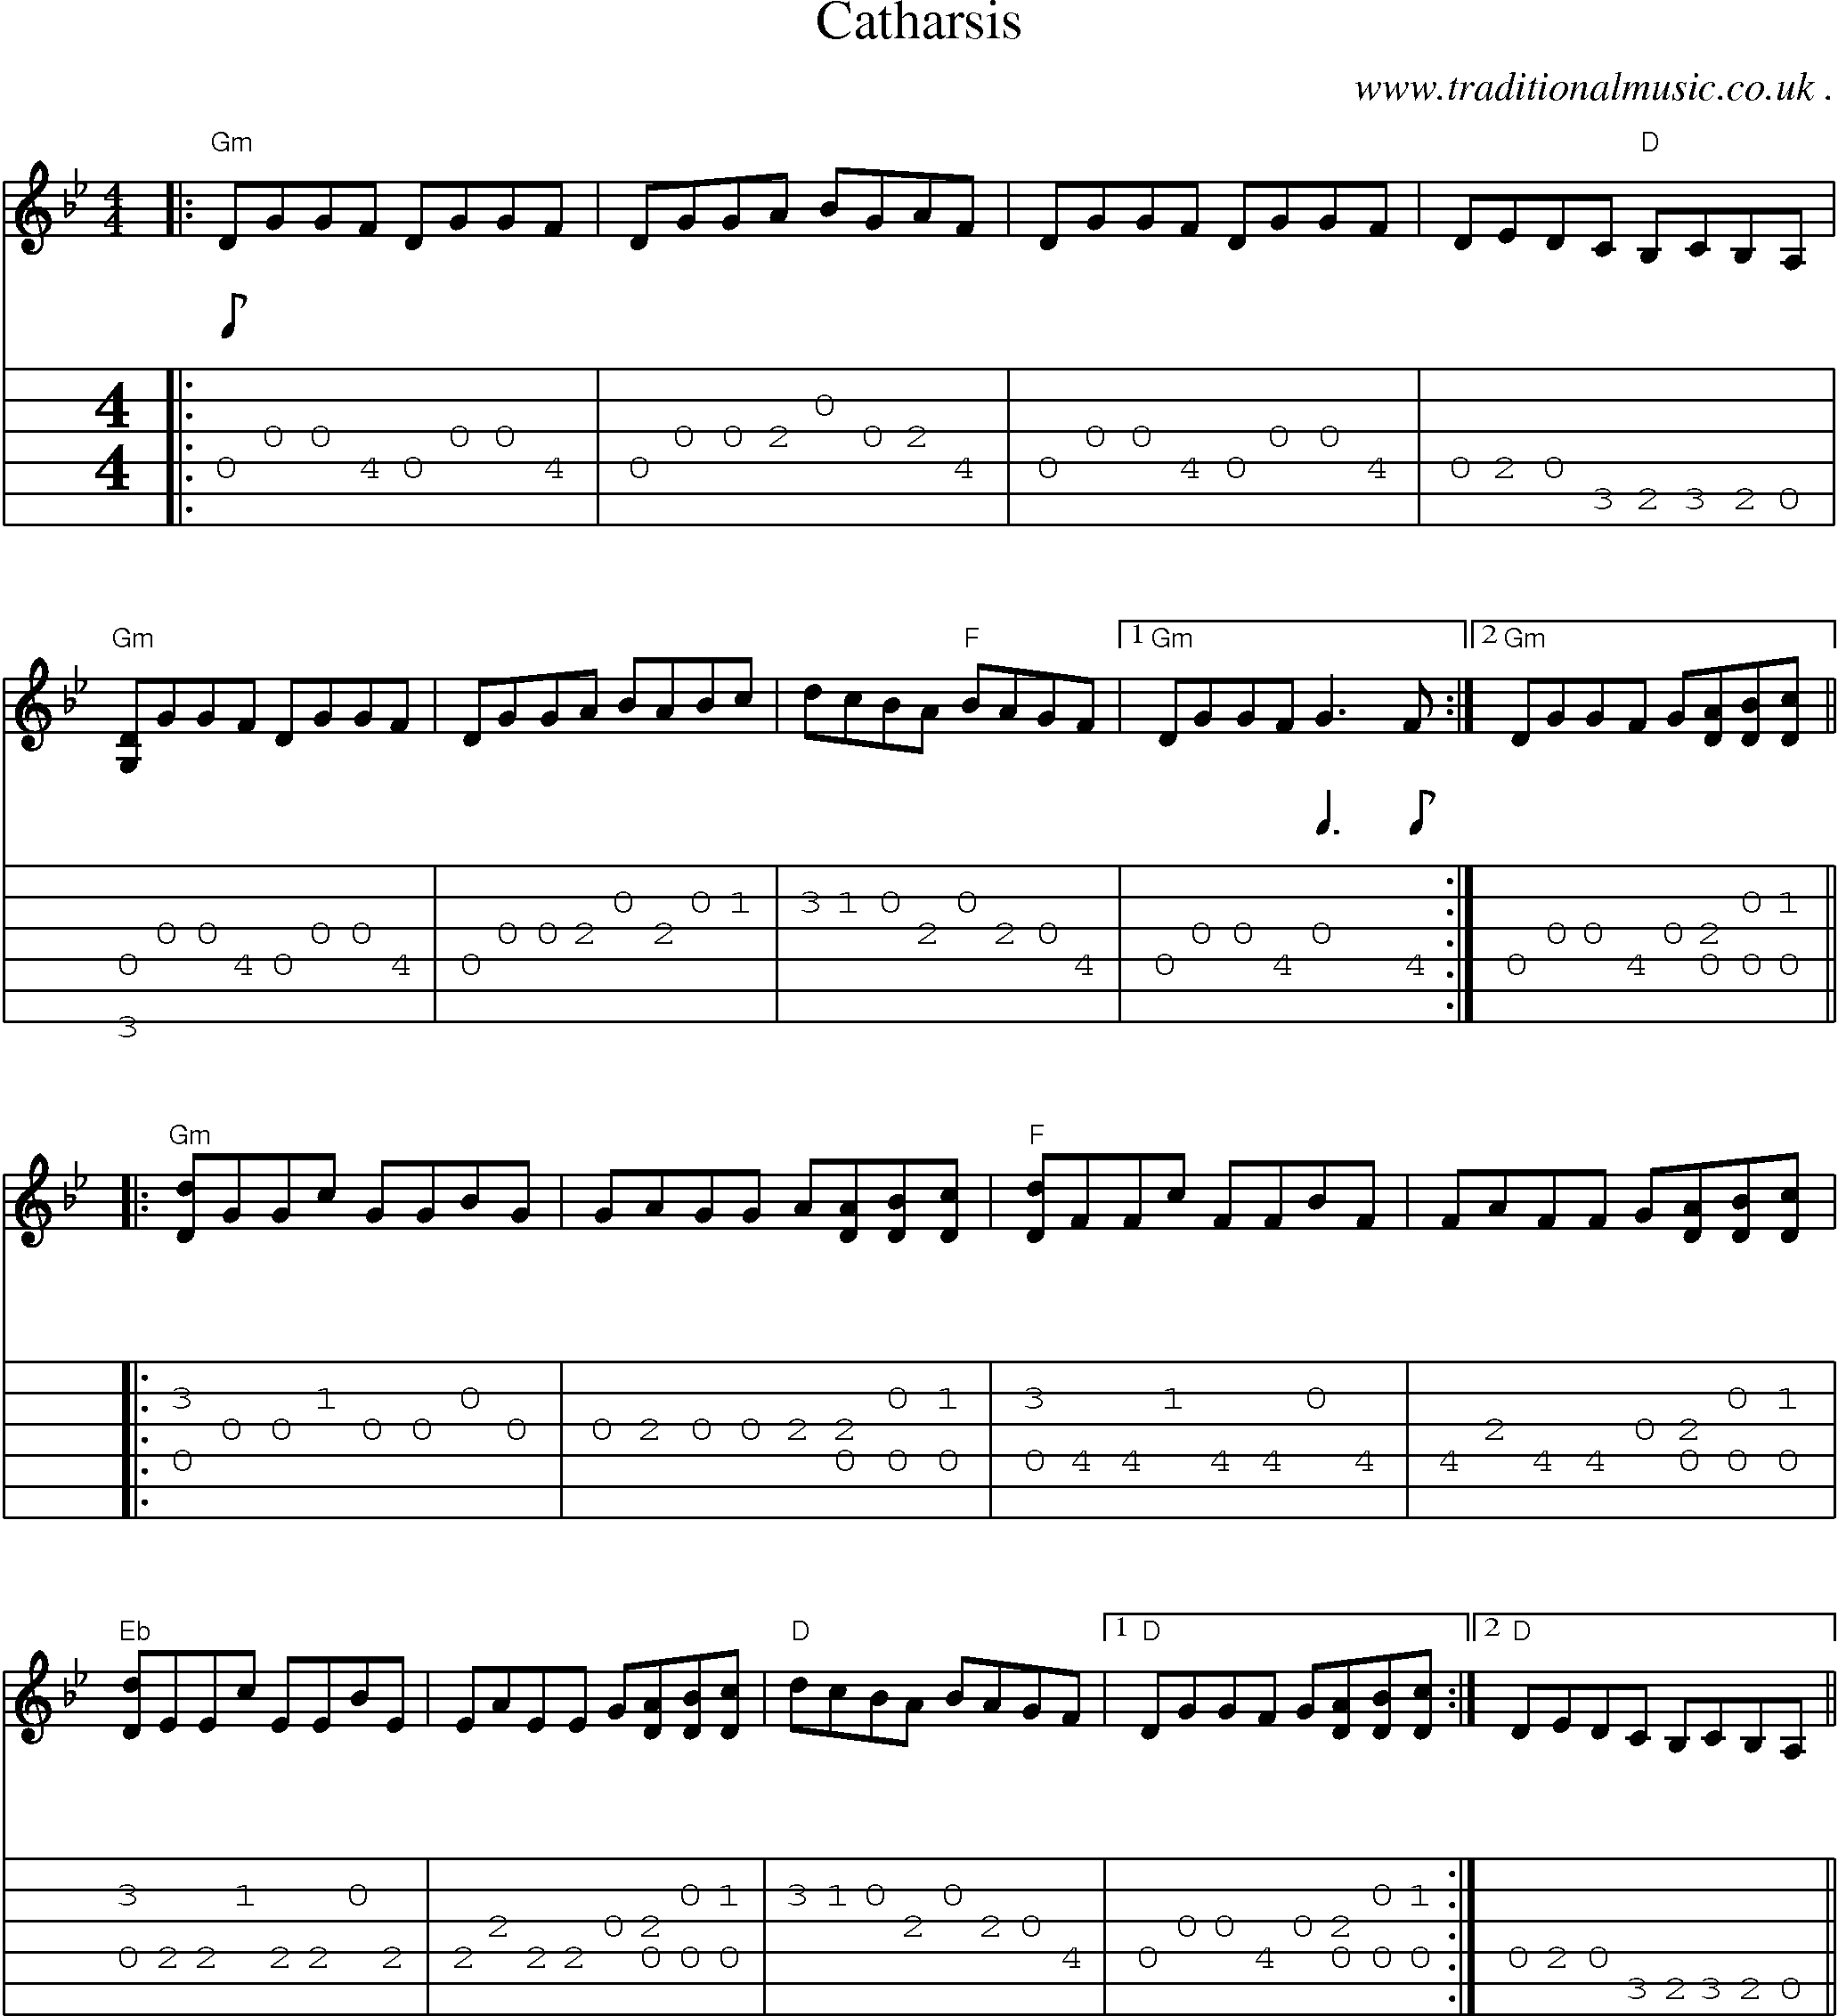 Music Score and Guitar Tabs for Catharsis